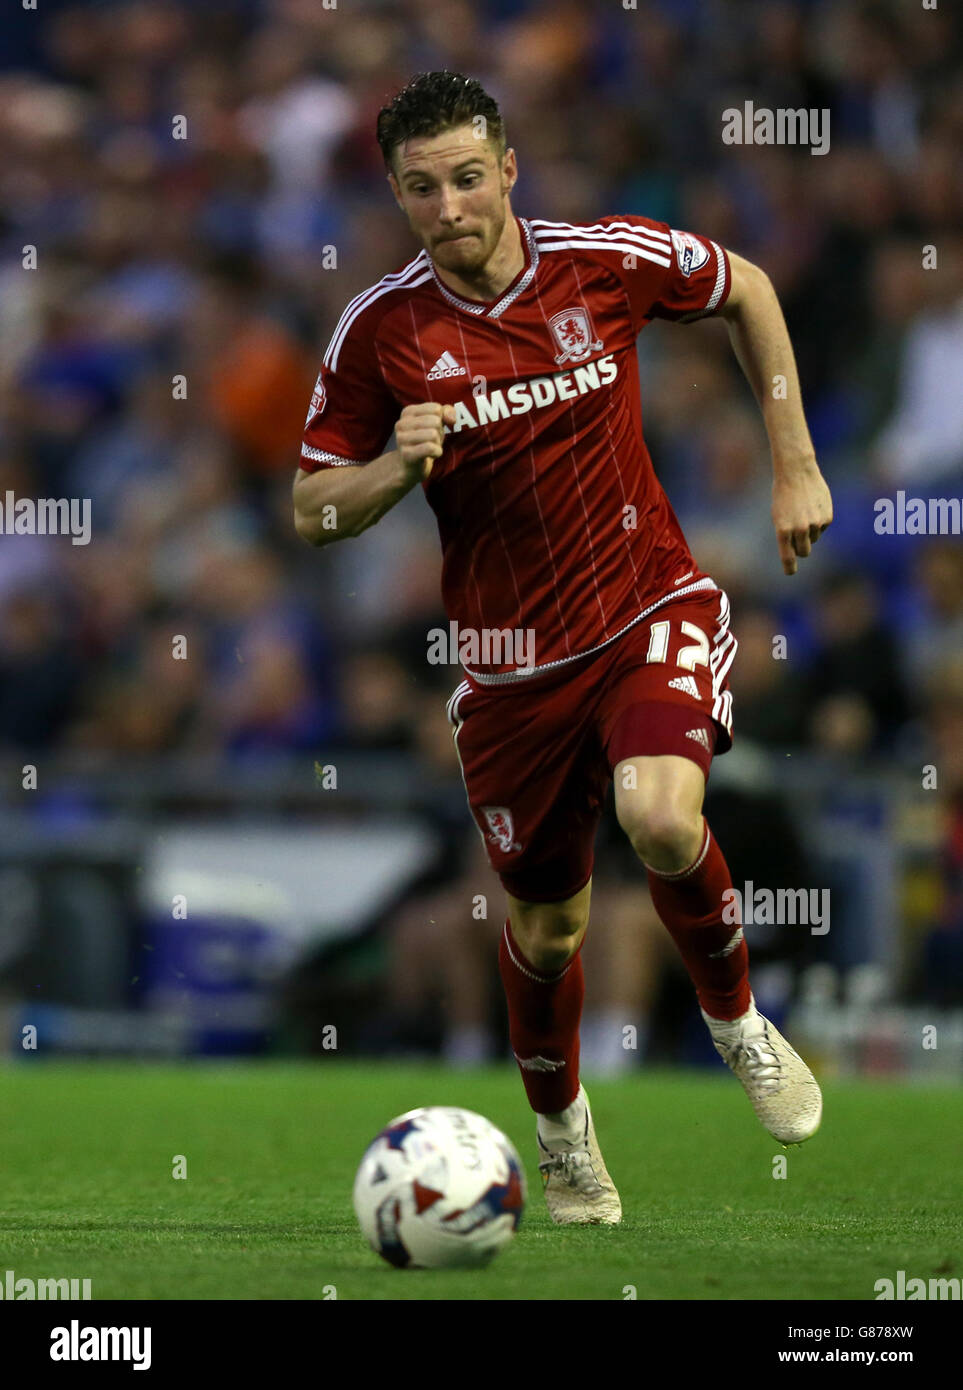 Middlesbrough's James Husband during the Capital One Cup, First Round match at Boundary Park, Oldham. PRESS ASSOCIATION Photo. Picture date: Wednesday August 12, 2015. See PA story SOCCER Oldham. Photo credit should read: Simon Cooper/PA Wire. No use with unauthorised audio, video, data, fixture lists, club/league logos or 'live' services. Online in-match use limited to 45 images, no video emulation. No use in betting, games or single club/league/player publications. Stock Photo